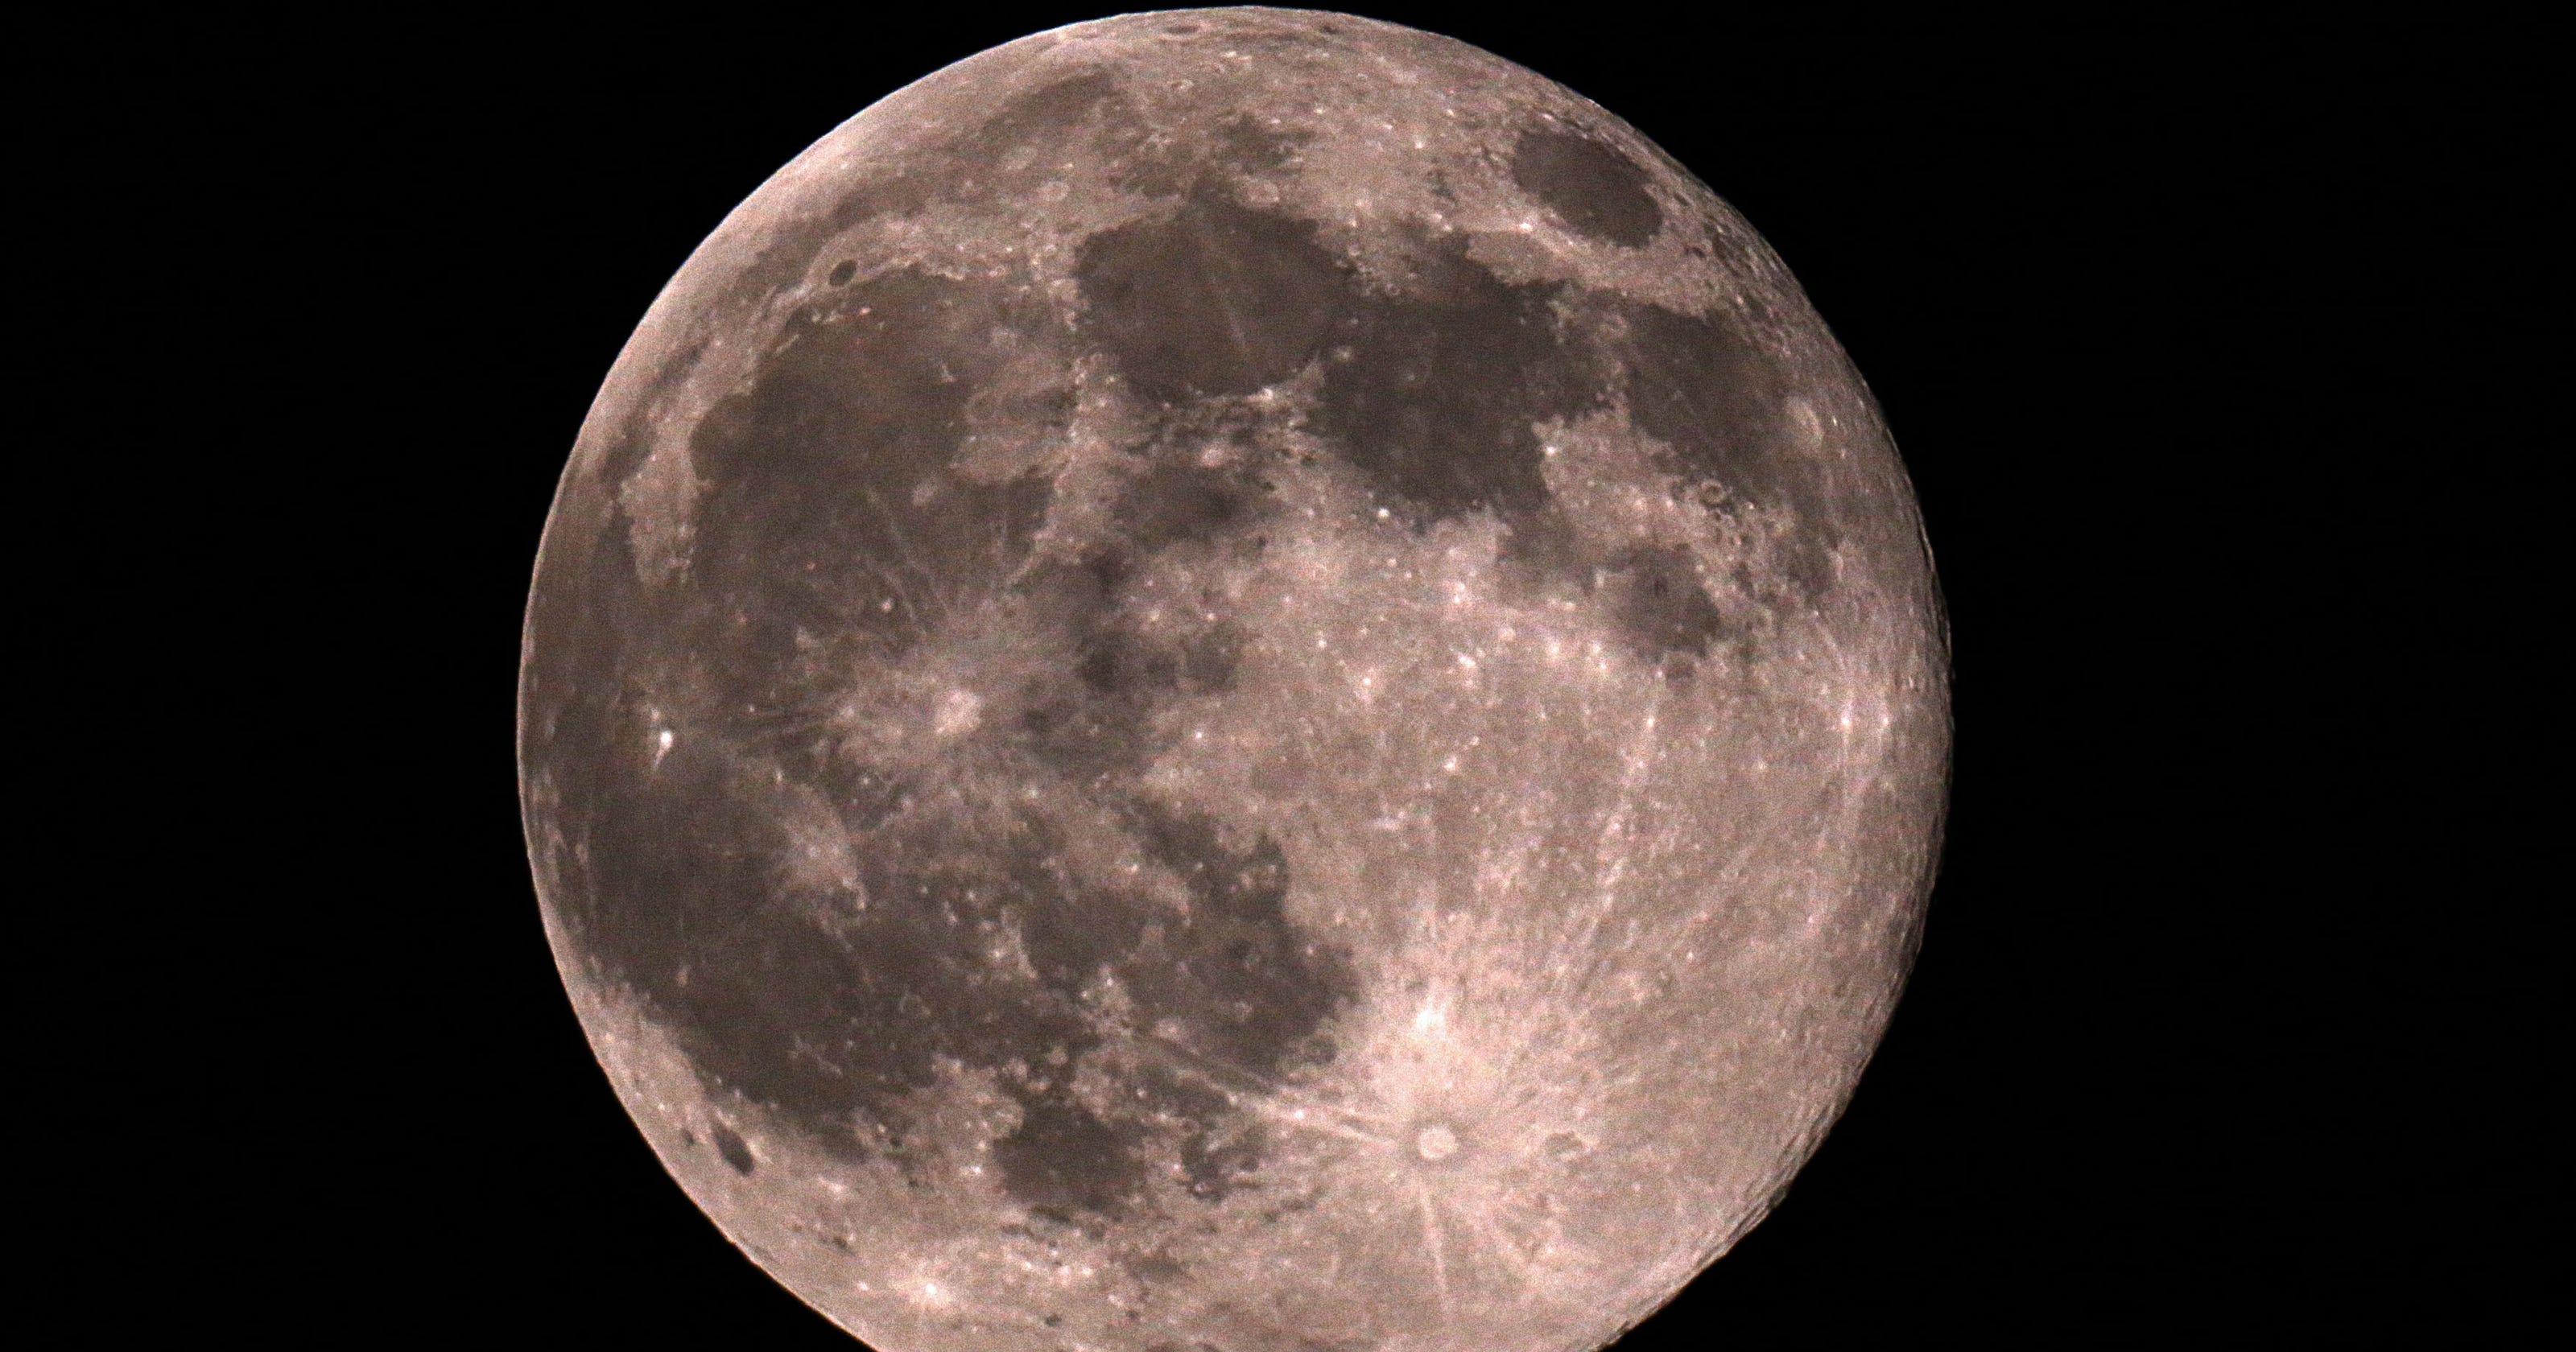 9 Facts to know about tonight's Blue Moon